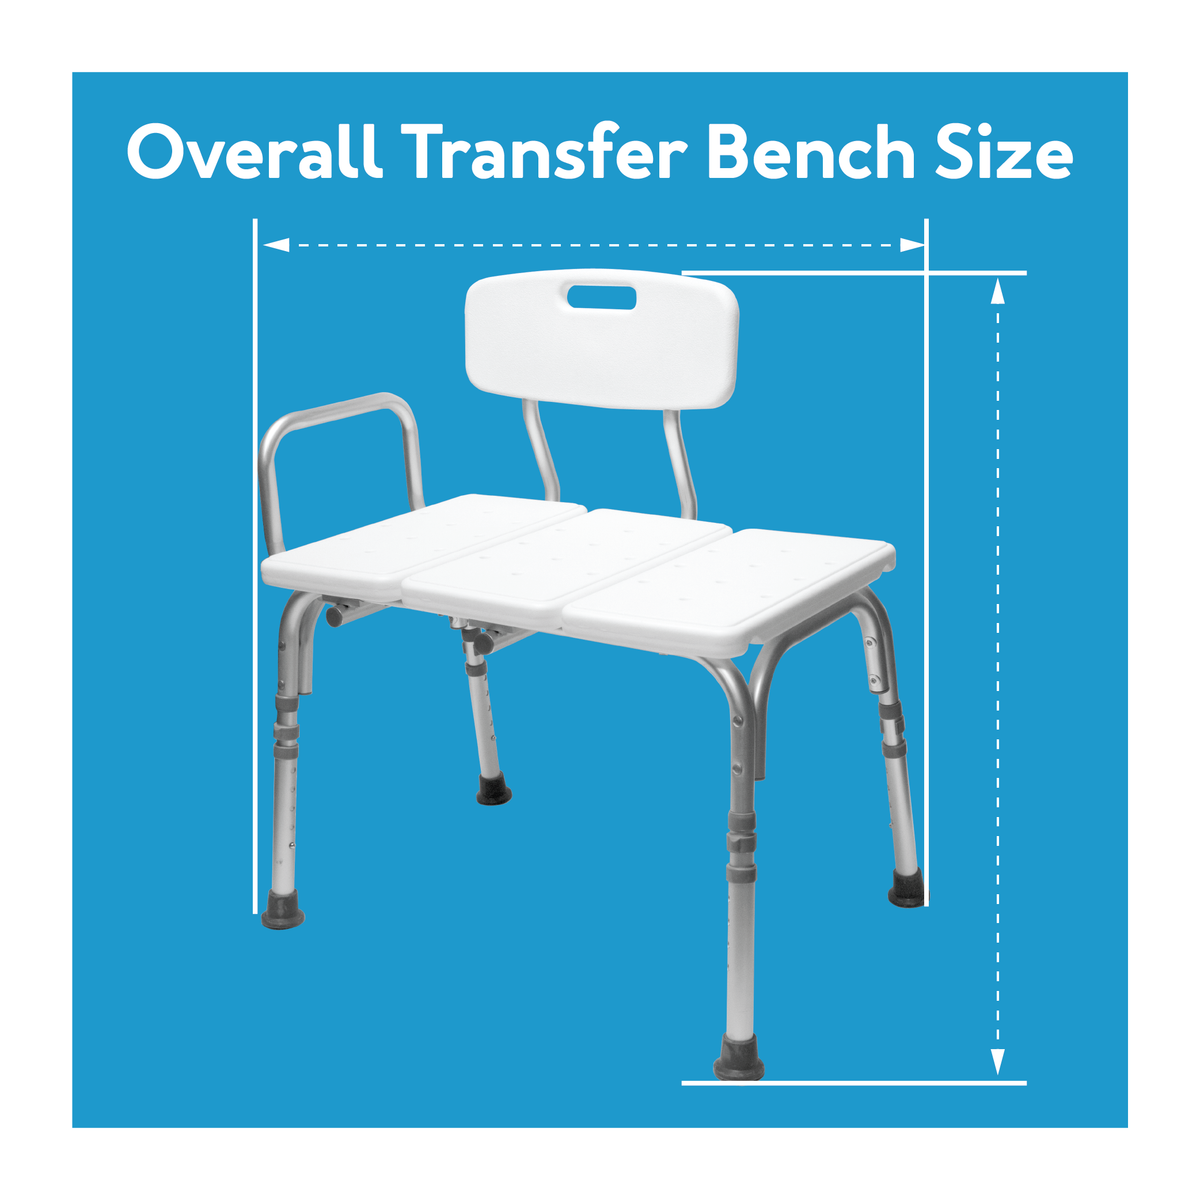 Overall Transfer Bench Size